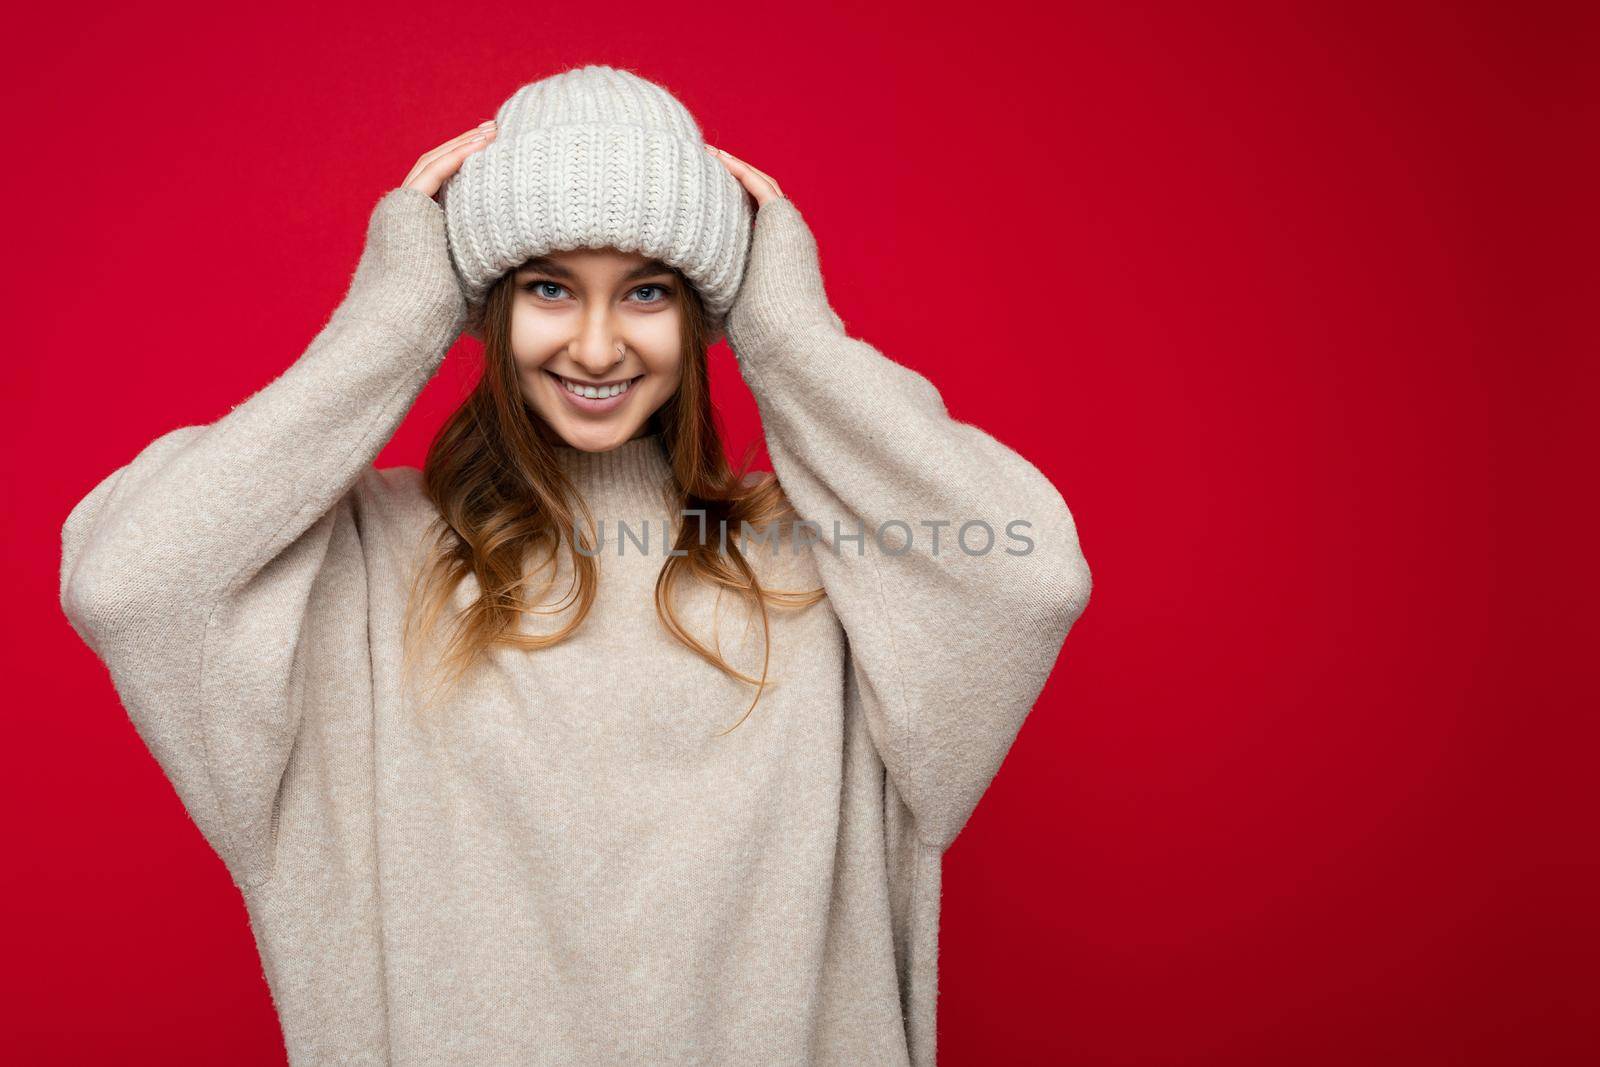 Attractive smiling happy young dark blond woman standing isolated over colorful background wall wearing everyday stylish outfit showing facial emotions looking at camera by TRMK